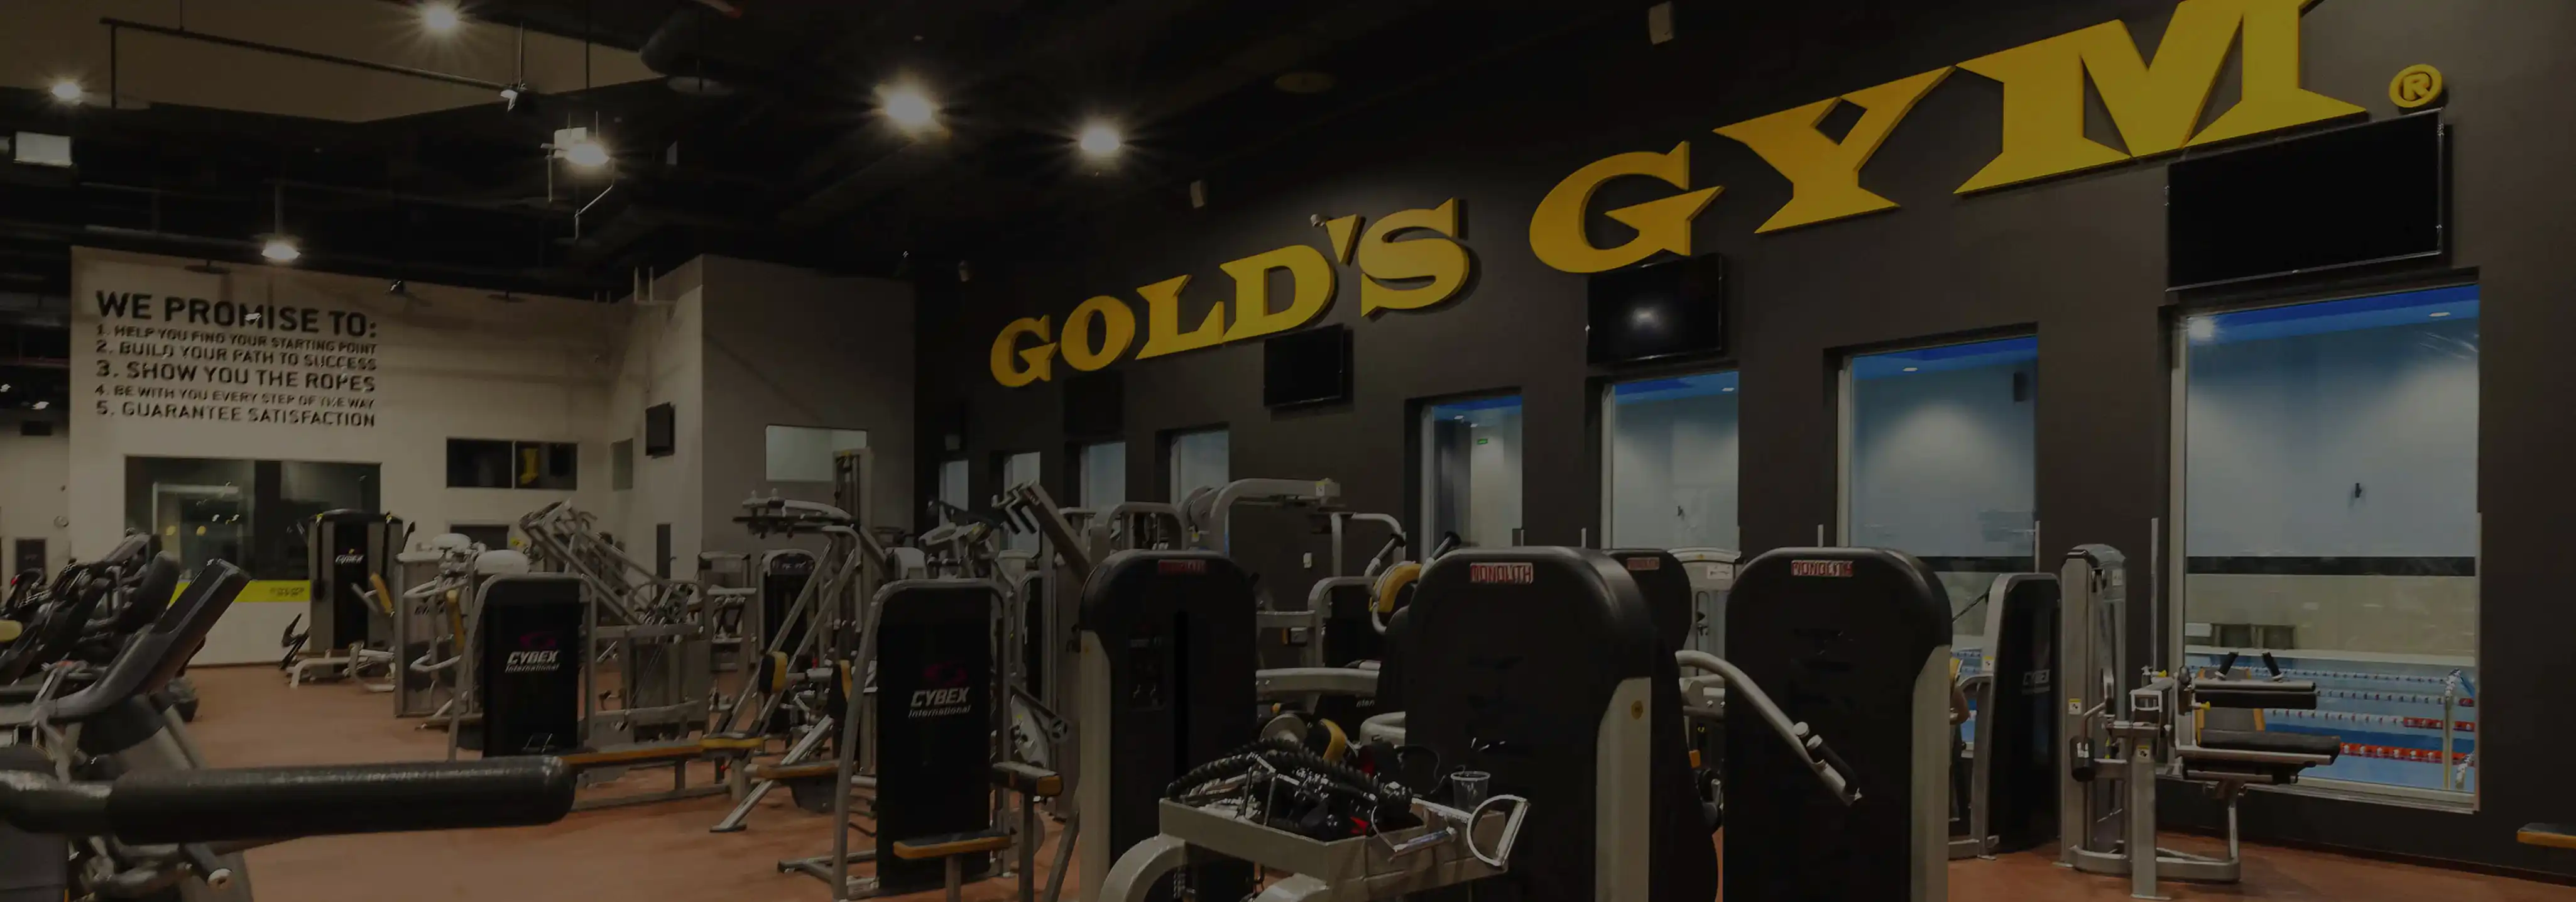 Gym Branding: Top Key Trends to Guide Your Efforts in 2022